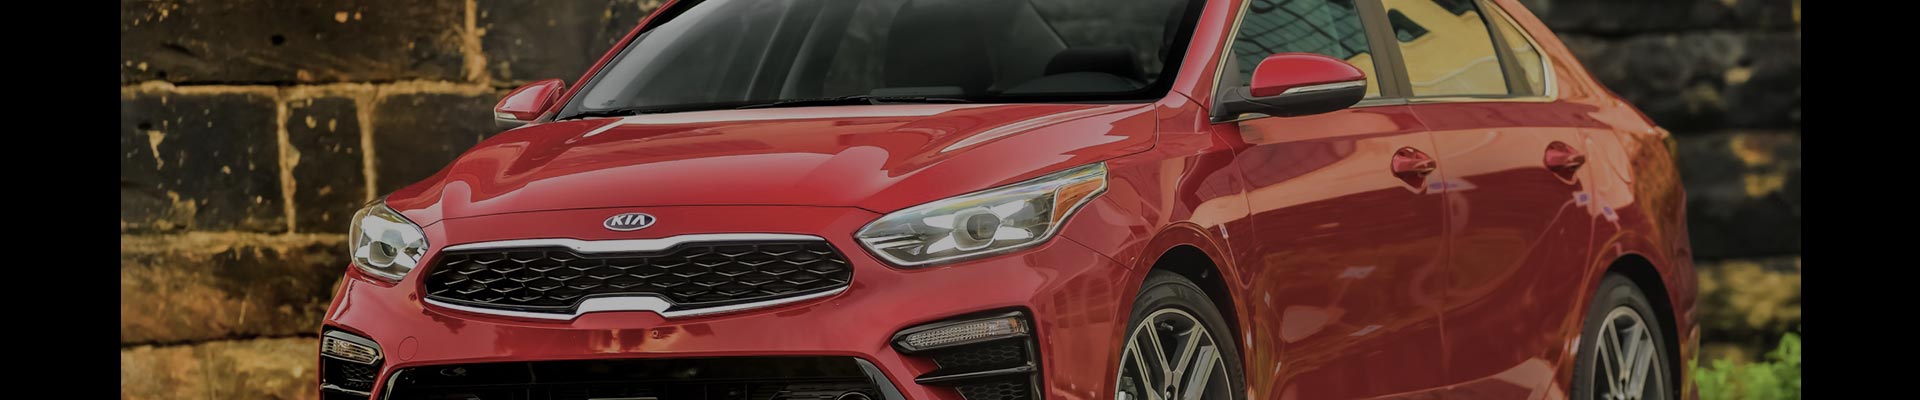 Shop Replacement and OEM 2021 Kia Forte Parts with Discounted Price on the Net